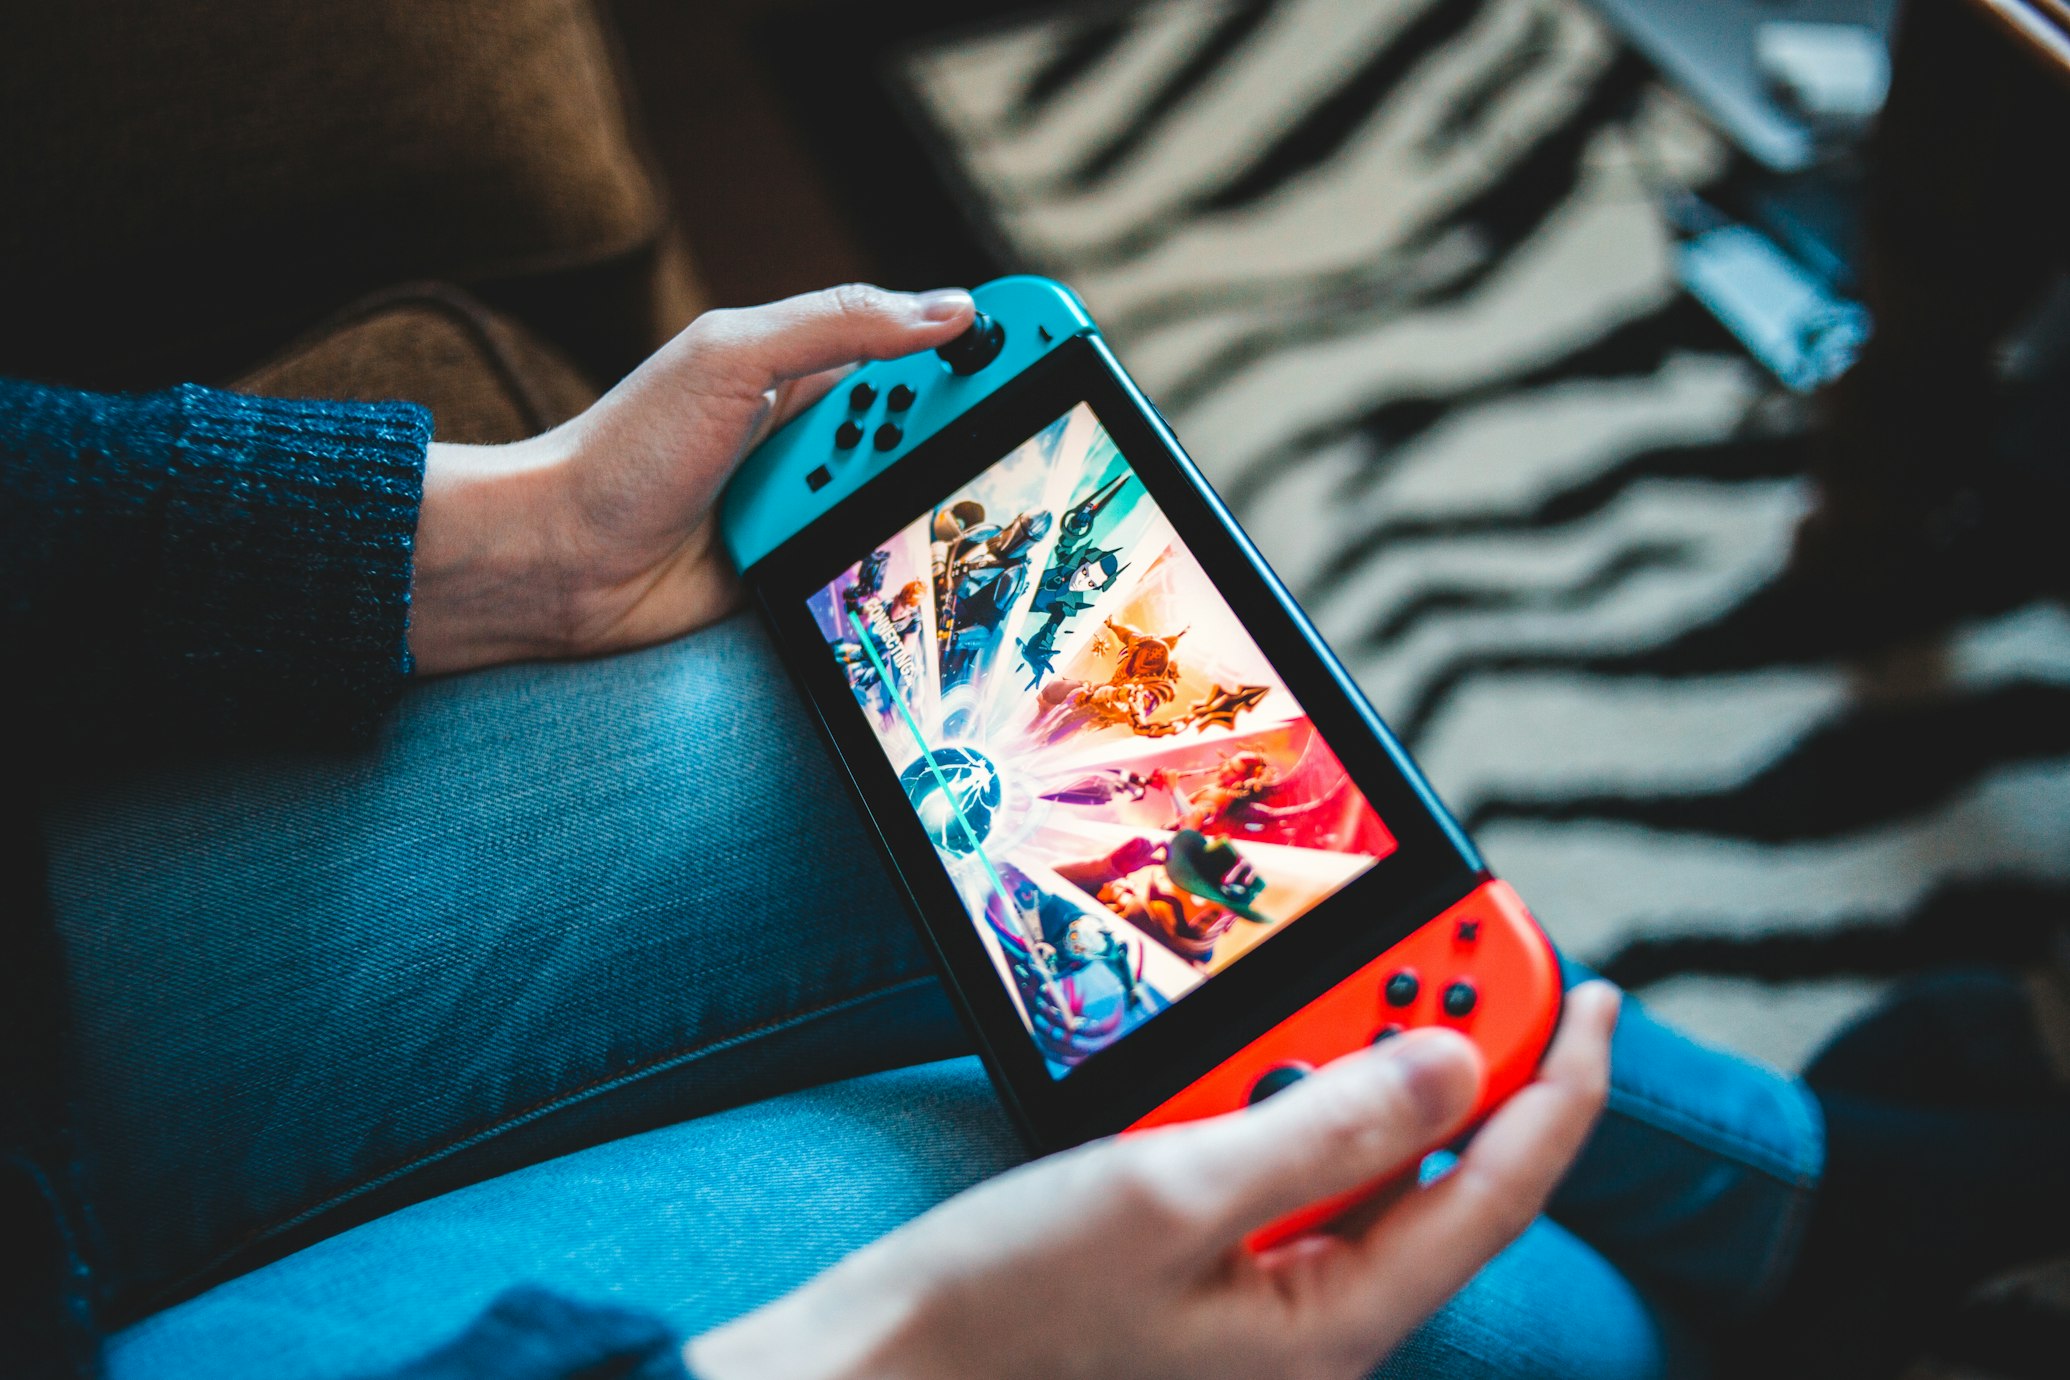 Nintendo Switch Won't Connect to Internet: Troubleshooting Guide